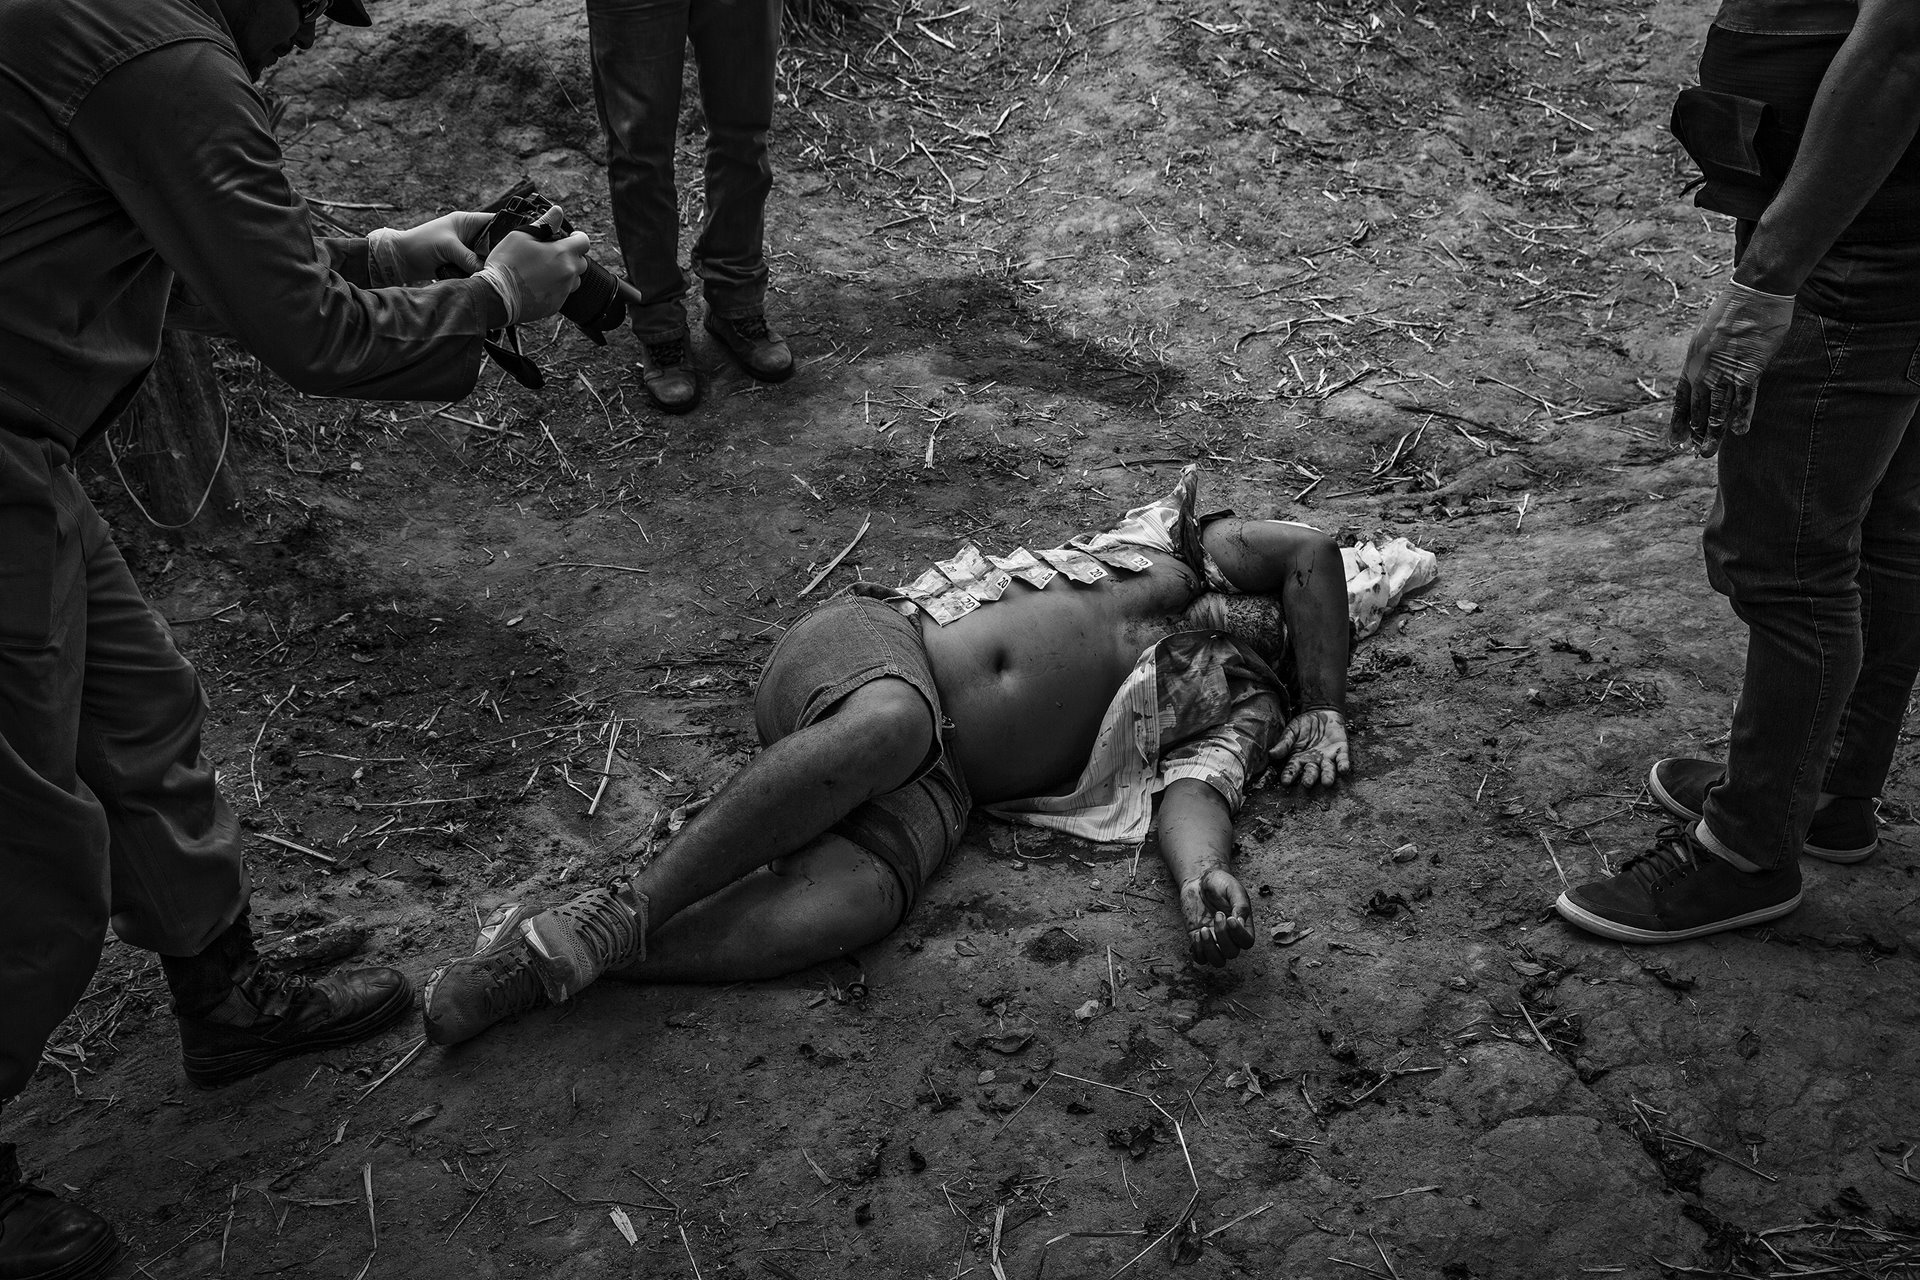 Police officers examine the body of a man killed in rural Altamira, near the Belo Monte Dam, Pará, Brazil. They have laid out banknotes found on the dead man, which they say indicates this was not a robbery but an extra-judicial killing. The 2017 Violence Atlas, published annually by Brazil&rsquo;s Institute of Applied Economic Research (IPEA), ranked Altamira as Brazil&rsquo;s most violent city.